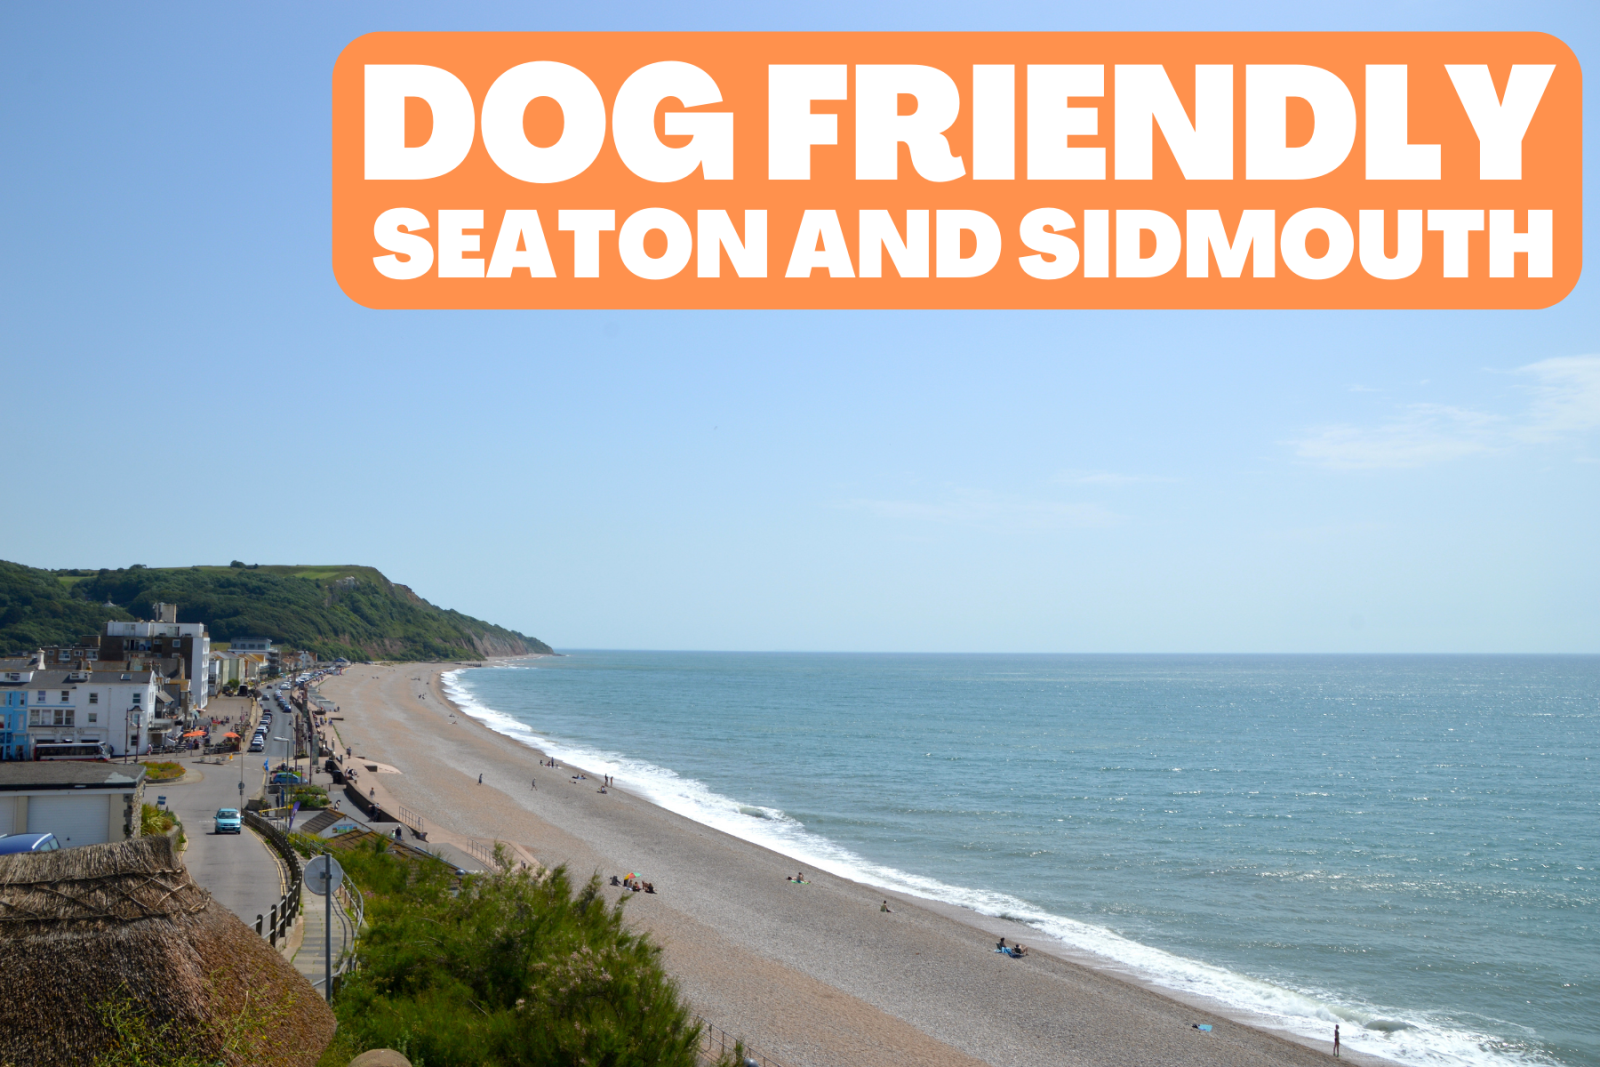 Dog friendly Sidmouth and Seaton